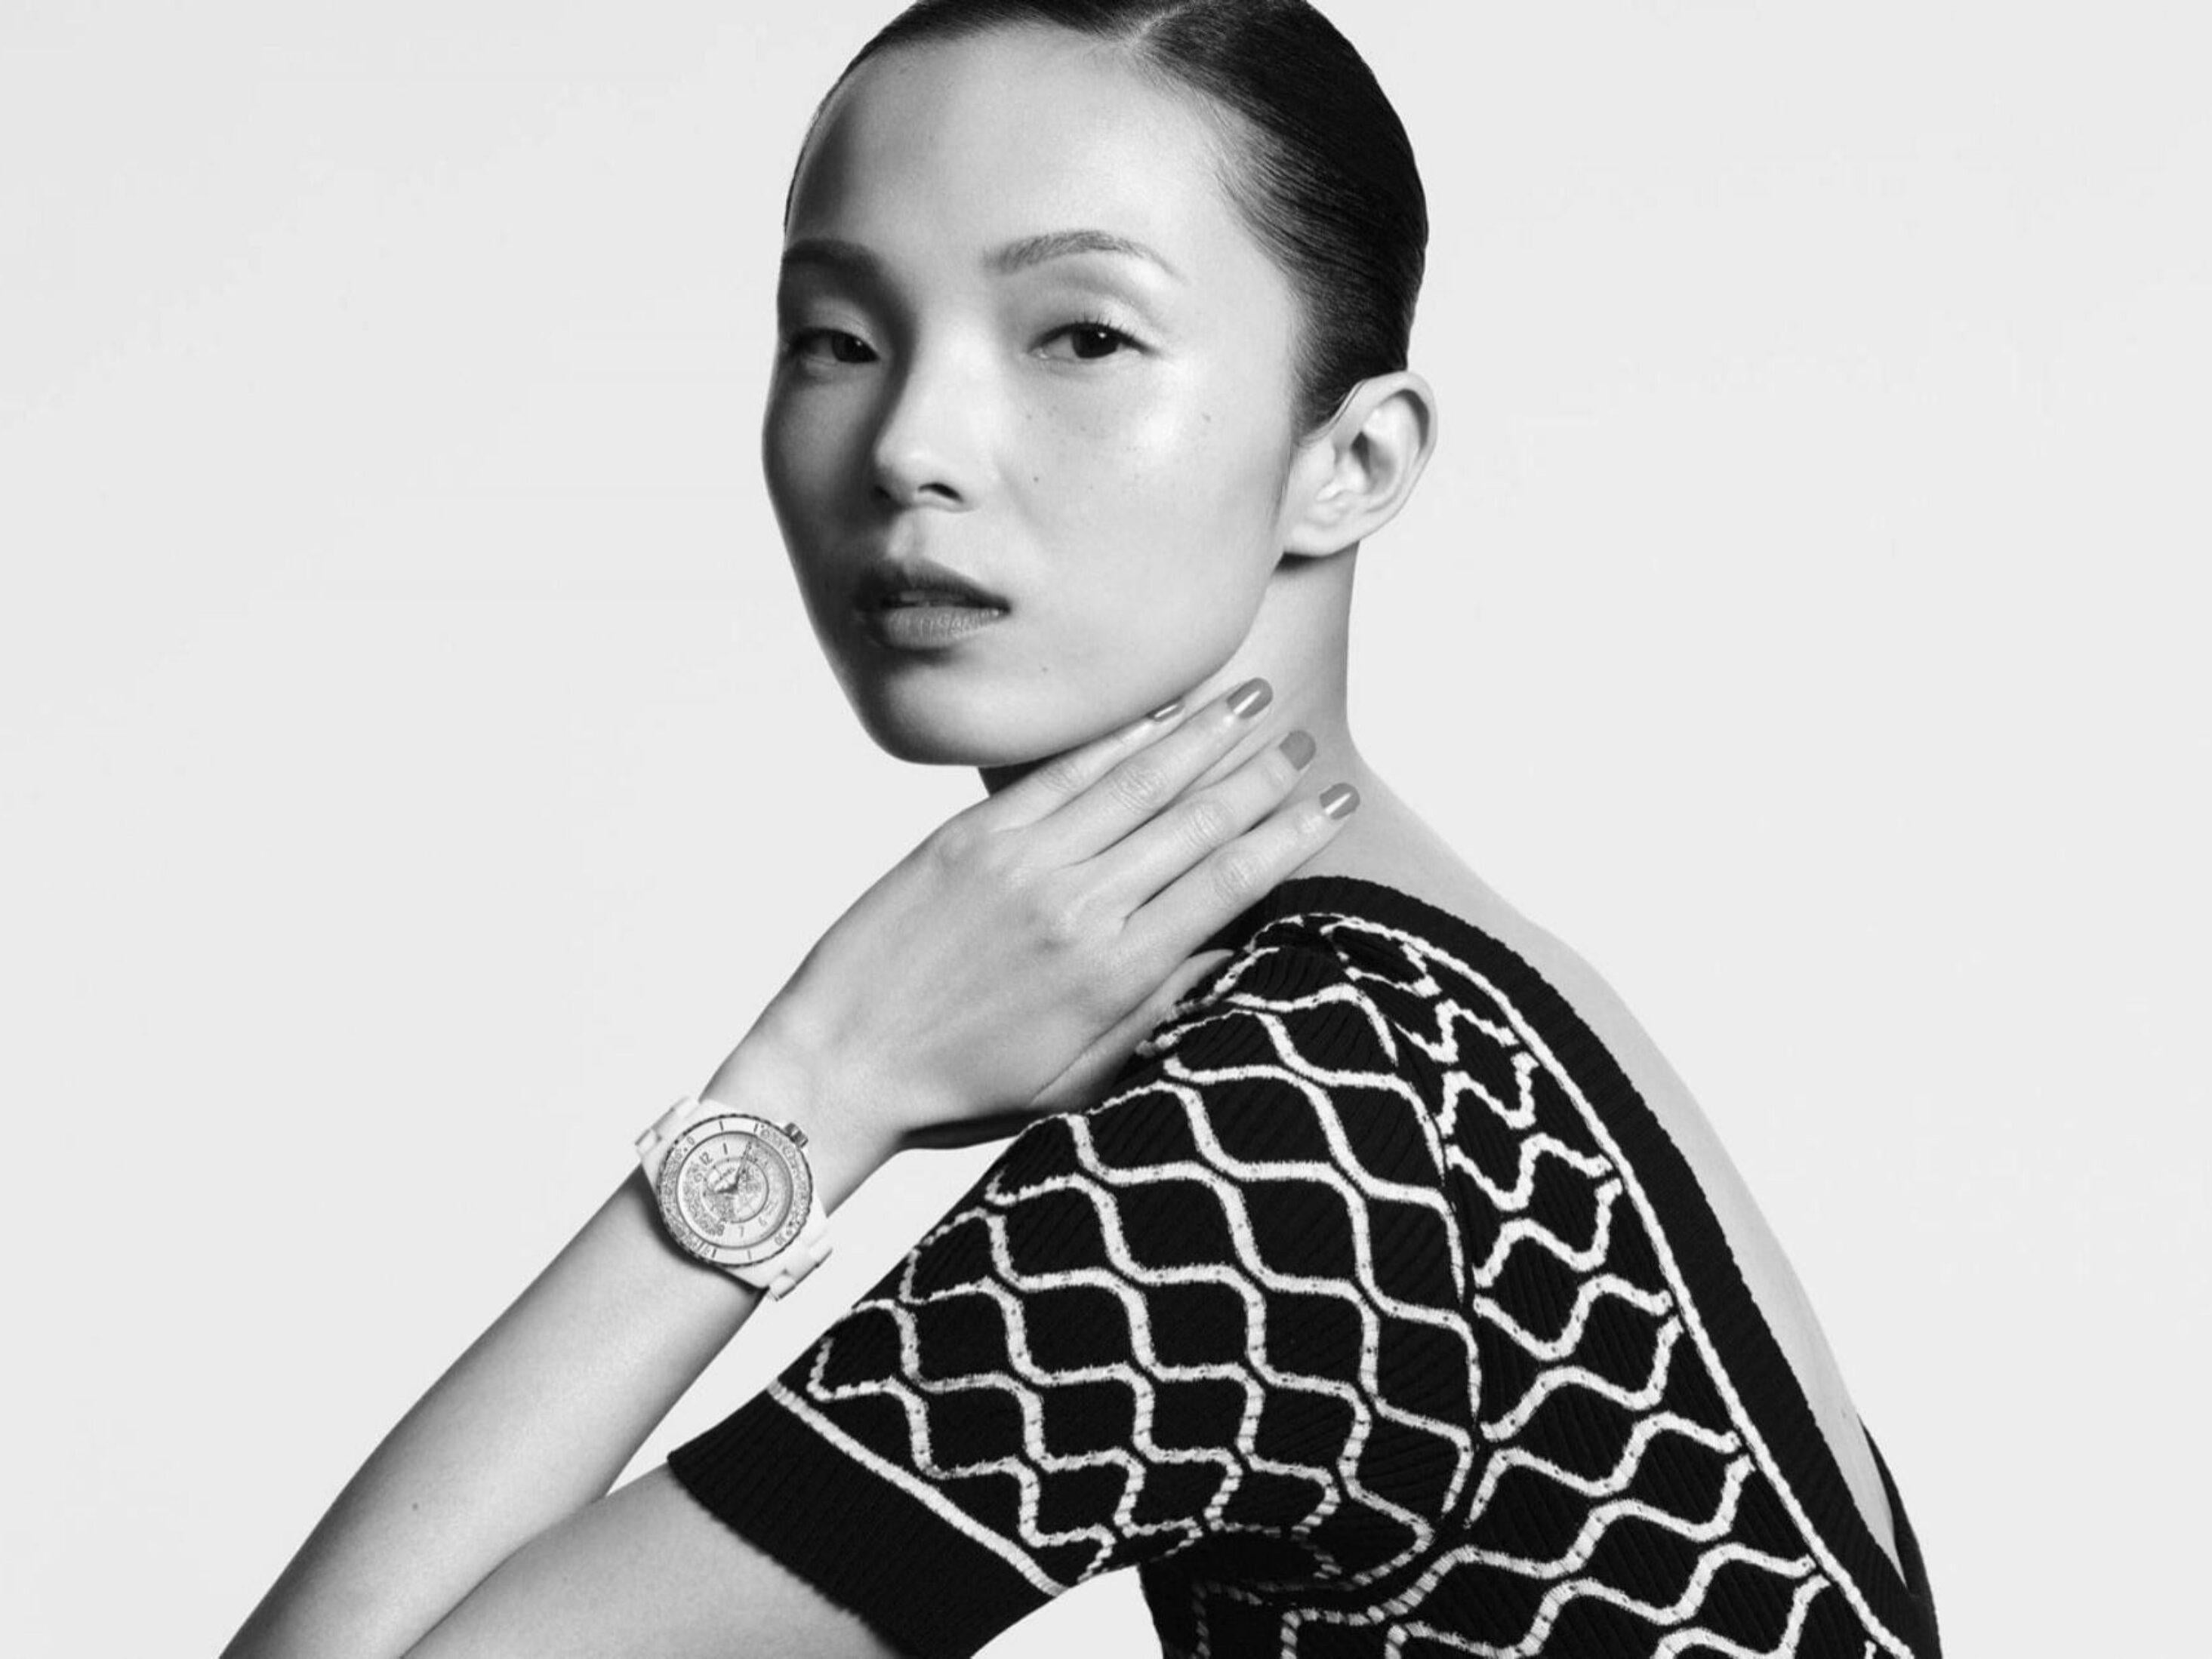 Great black and white cotton knit top from the house of Chanel worn on the ad for the Limited Edition of the J12 watch in 2020.
It features a round neck, short sleeves and a low cut back.
A knit CC logo in the front

Year: 2020
Fabric: 100%